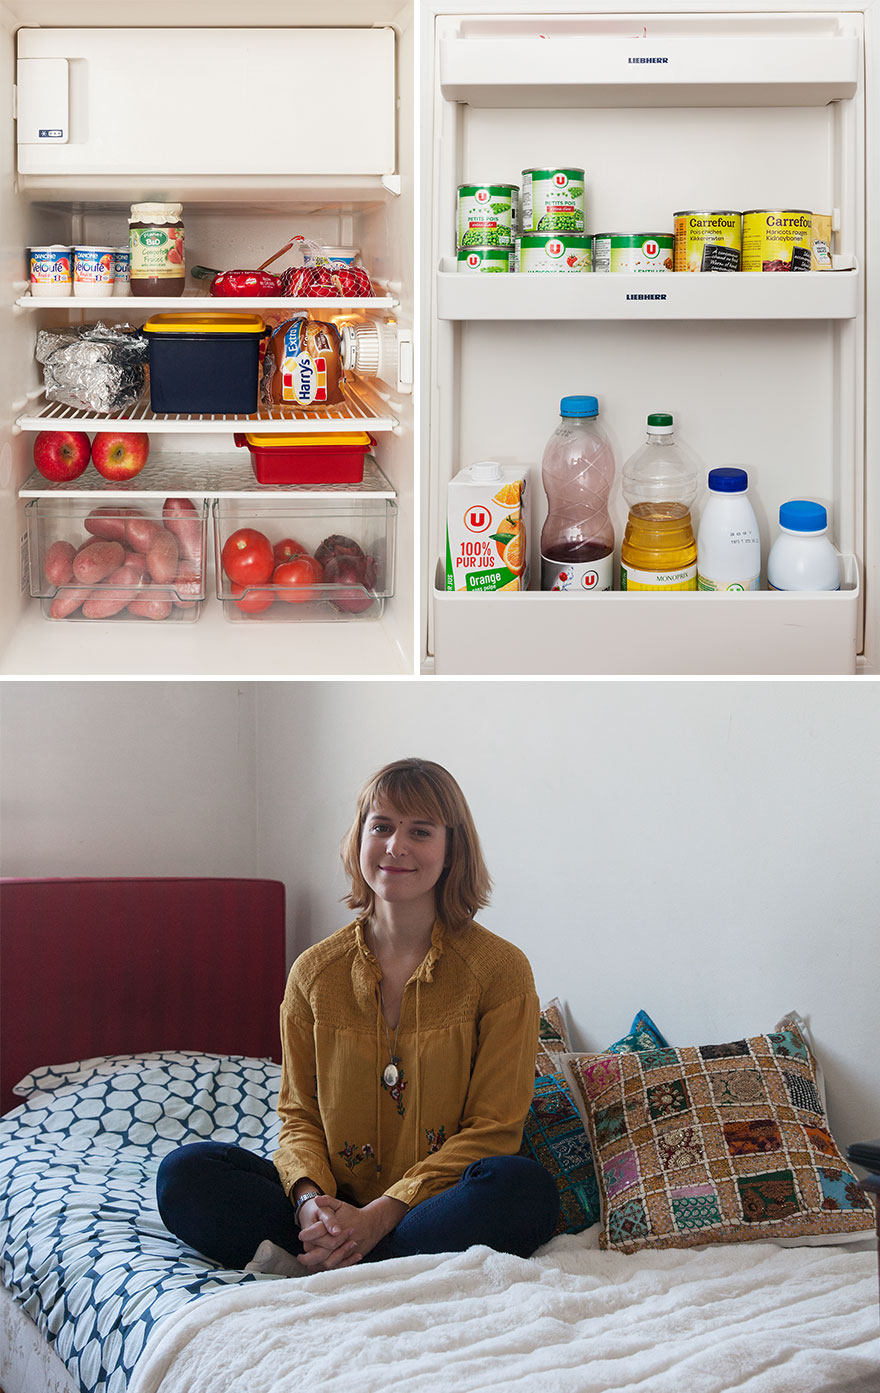 photographer compares 14 fridges and their owners around the world